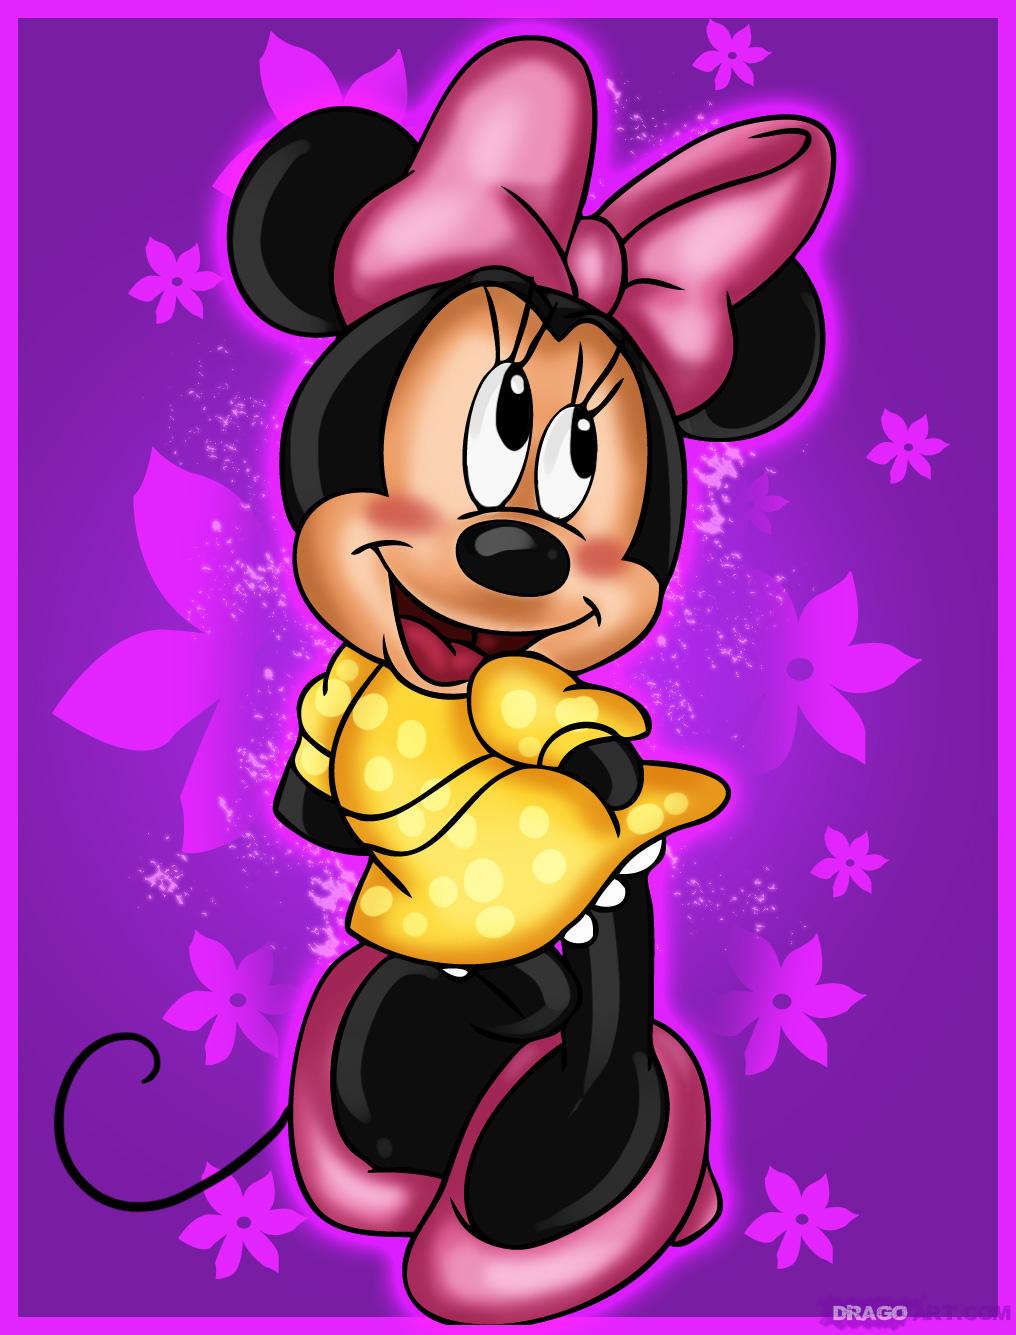 Minnie Mouse Hd Wallpapers Wallpaper Cave